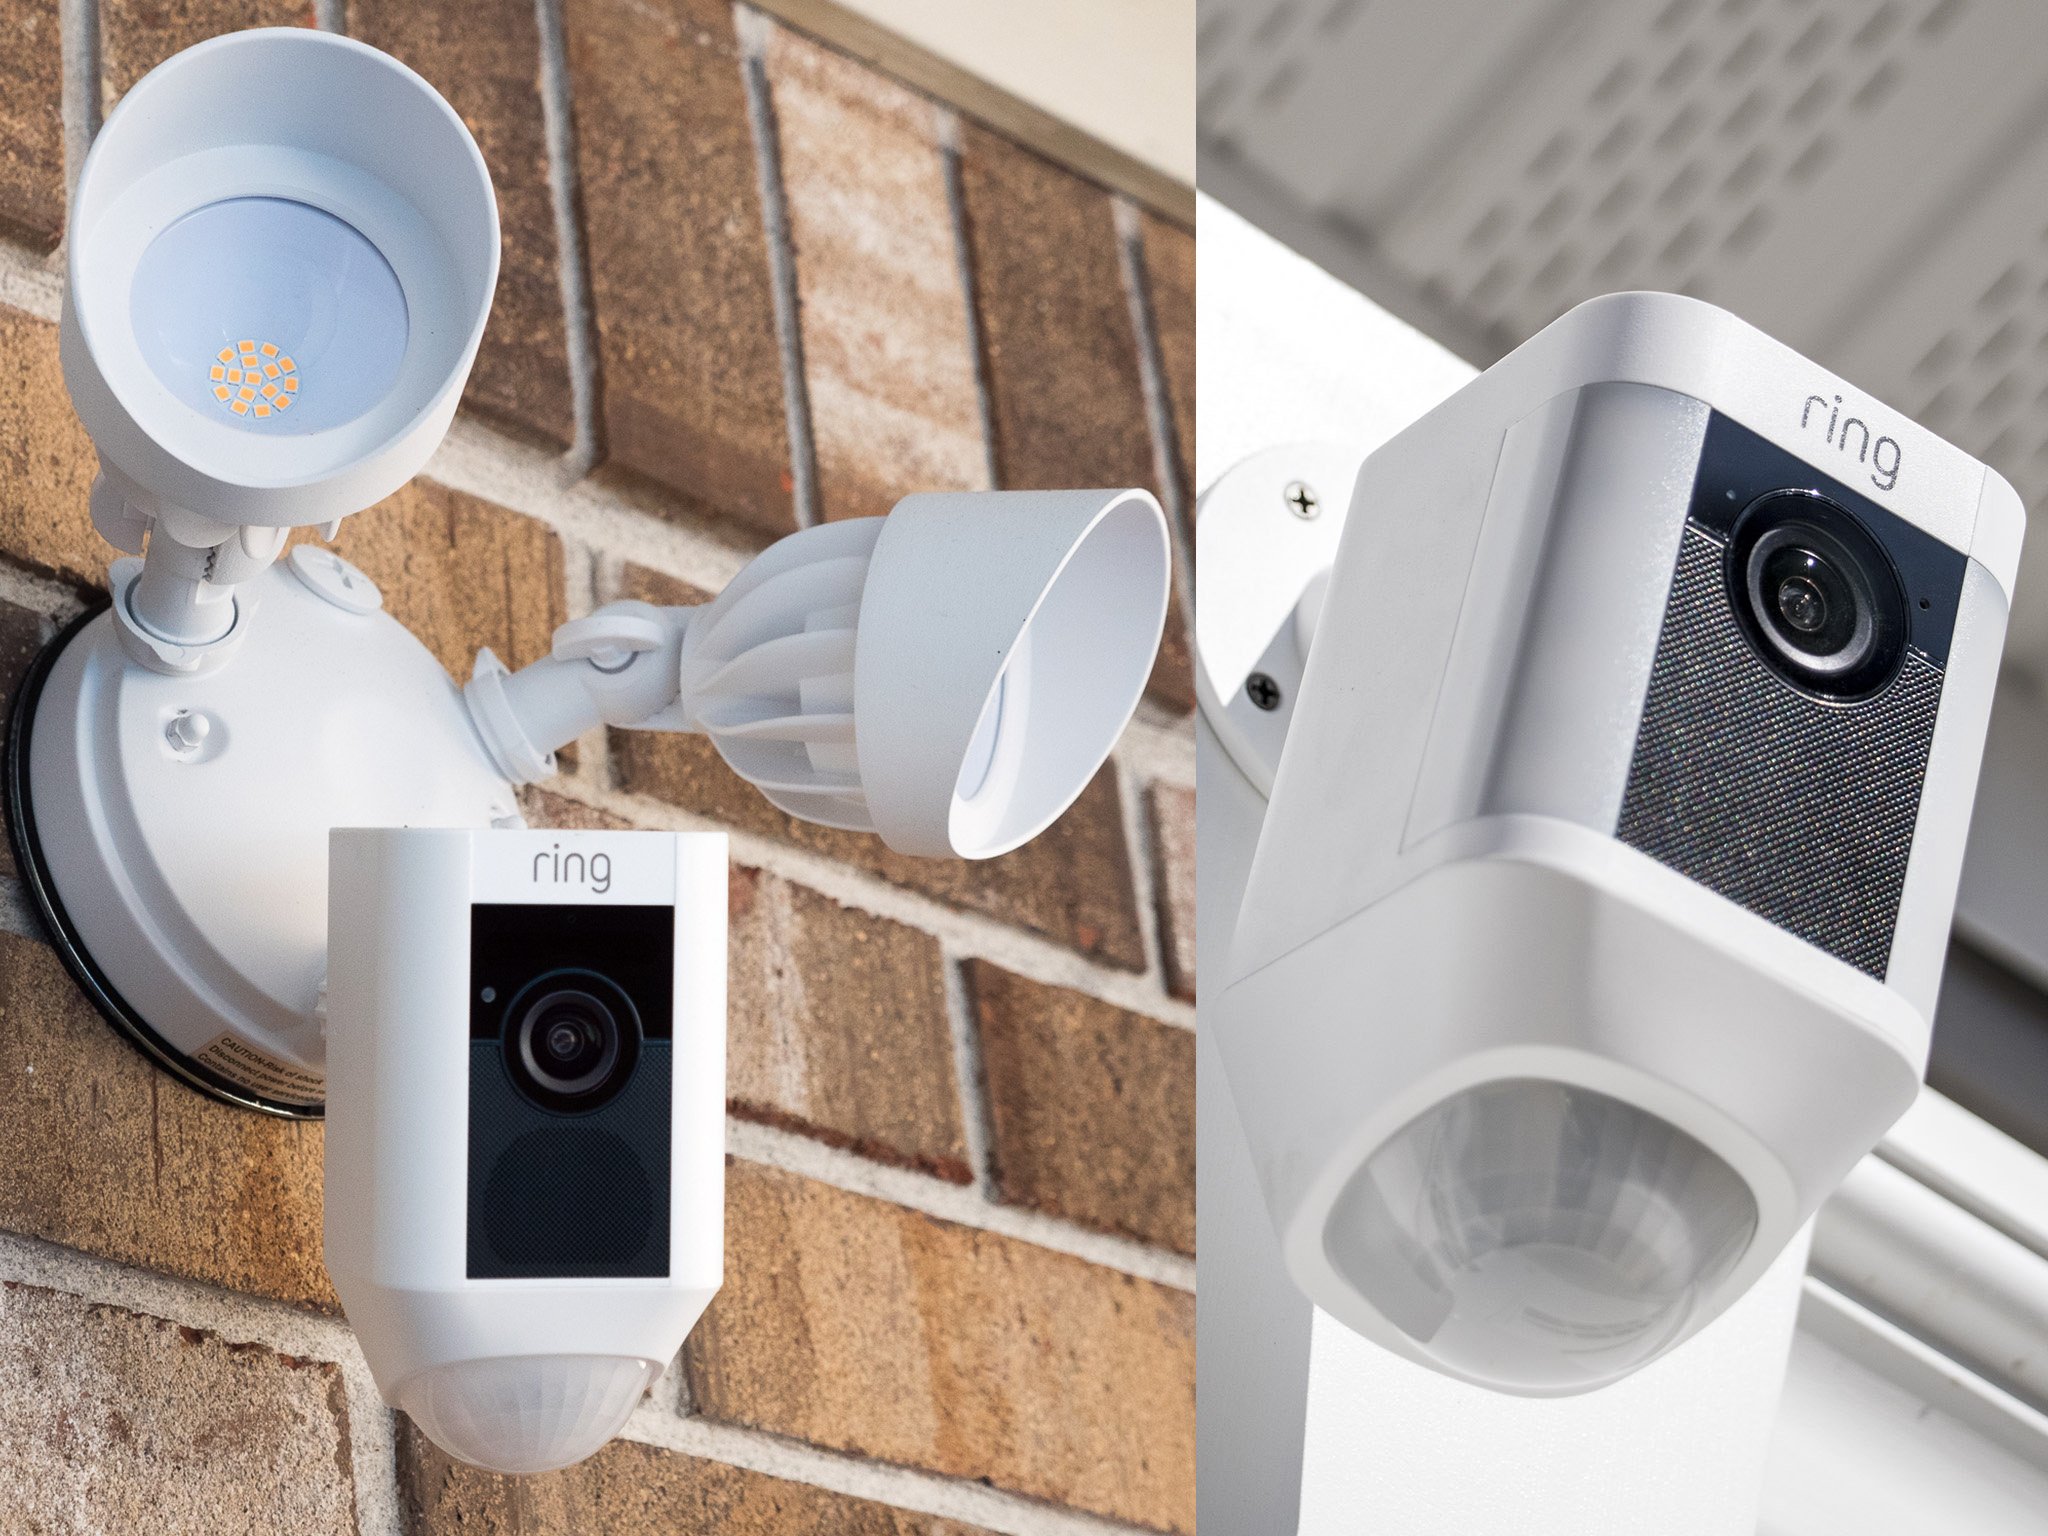 two different models of ring security cameras